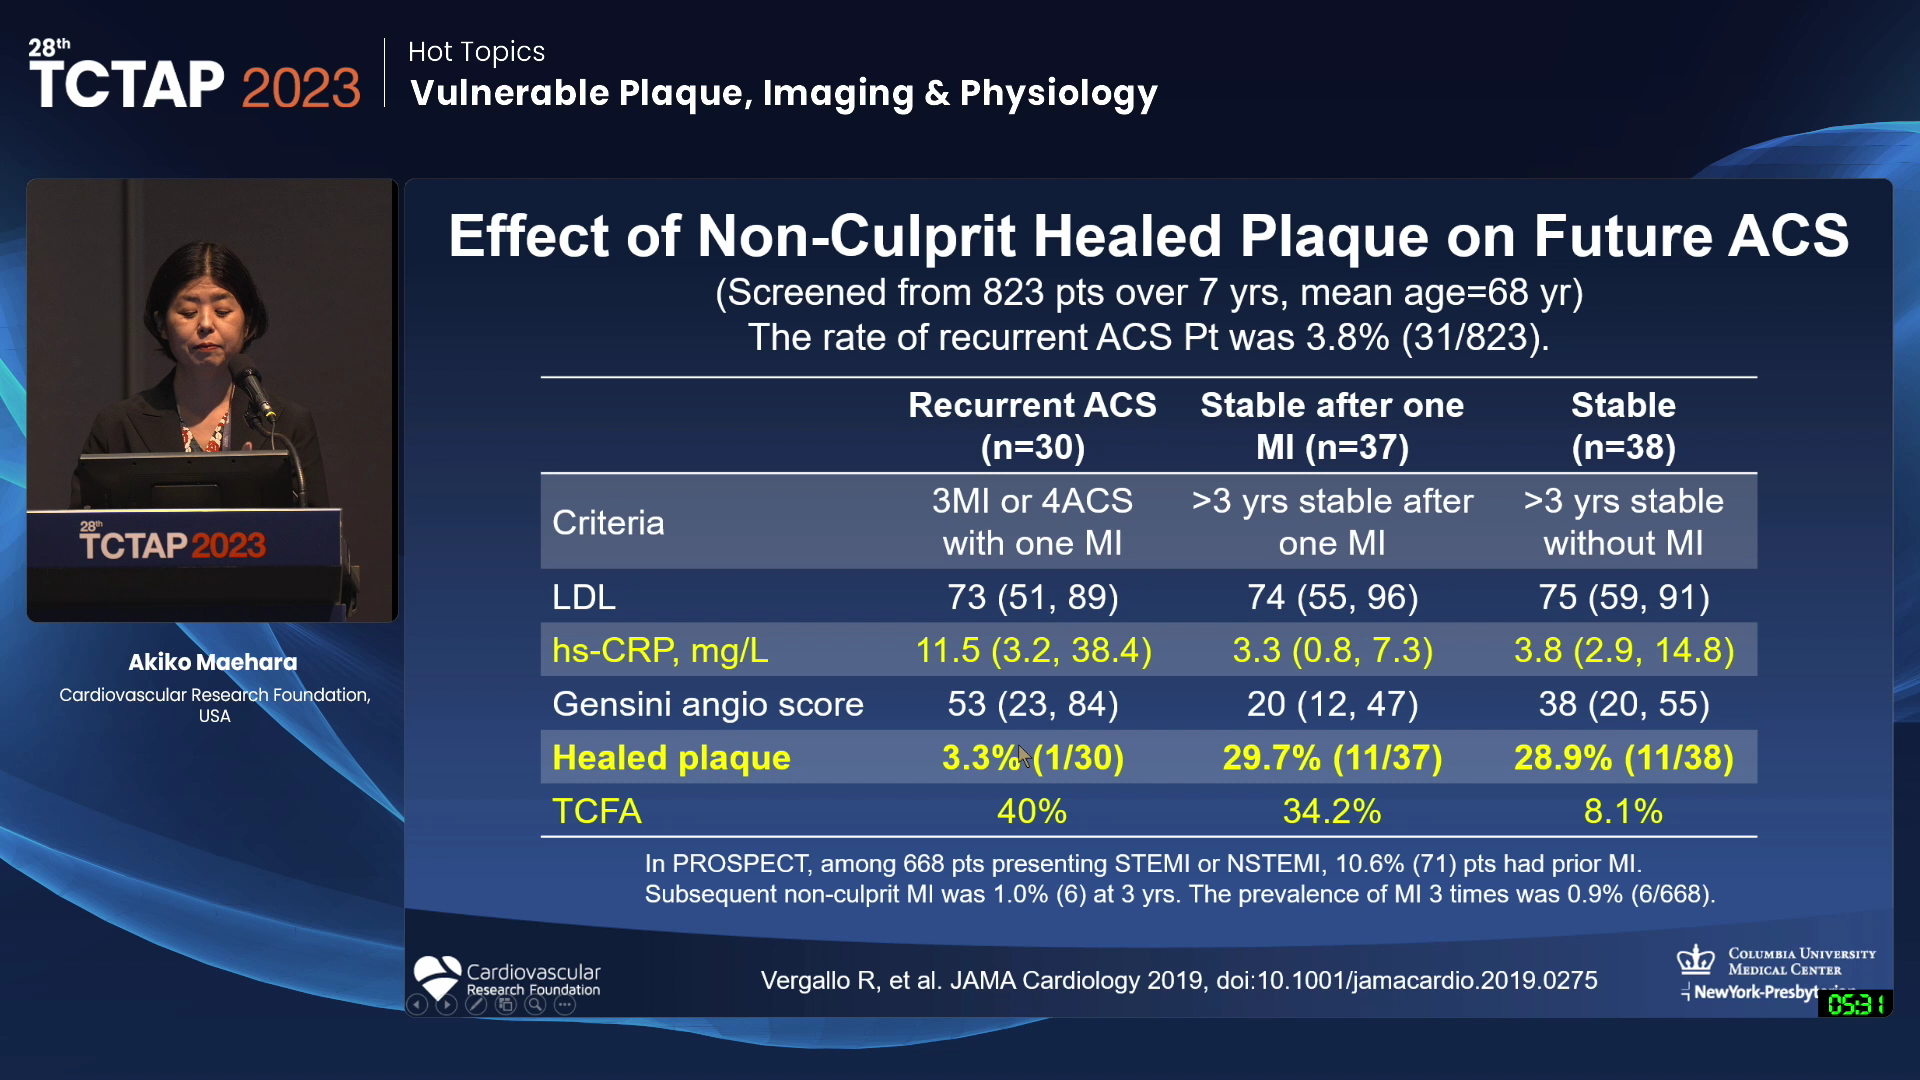 [Hot Topics] Vulnerable Plaque, Imaging & Physiology